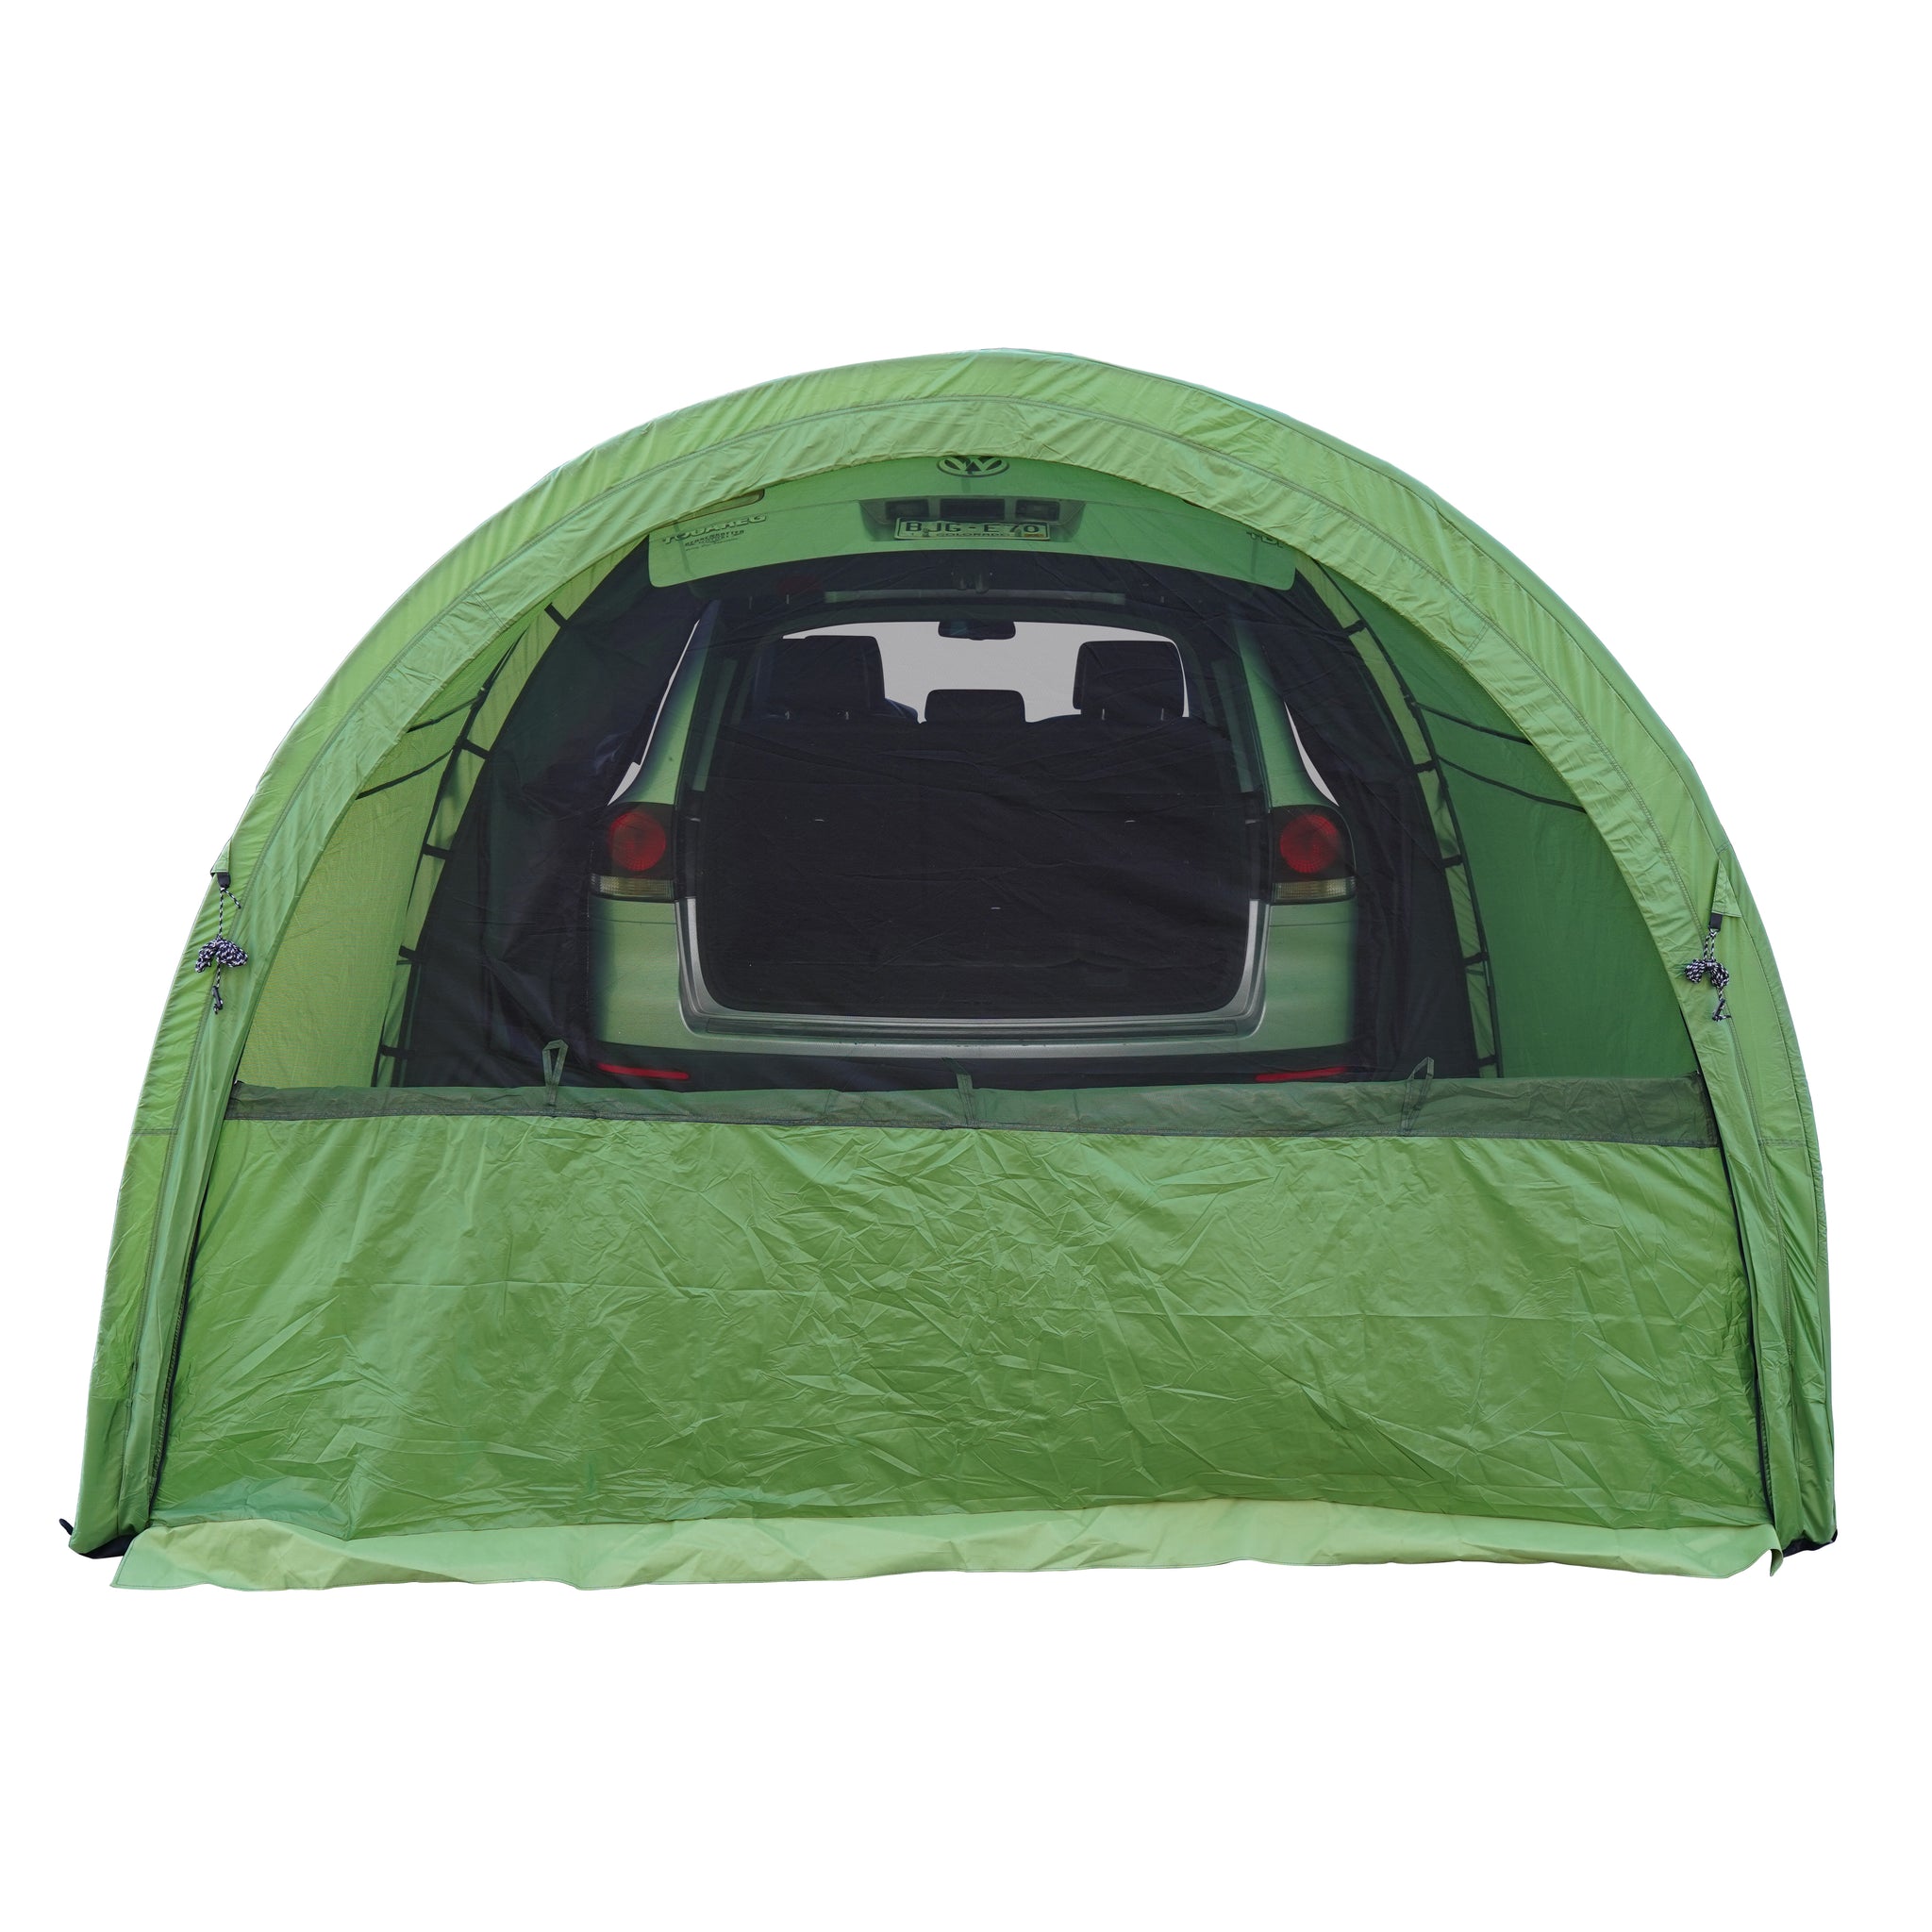 sneeuw campus gebroken ArcHaus Shelter & Tailgate Tent | Tentris Shelters | Let's Go Aero